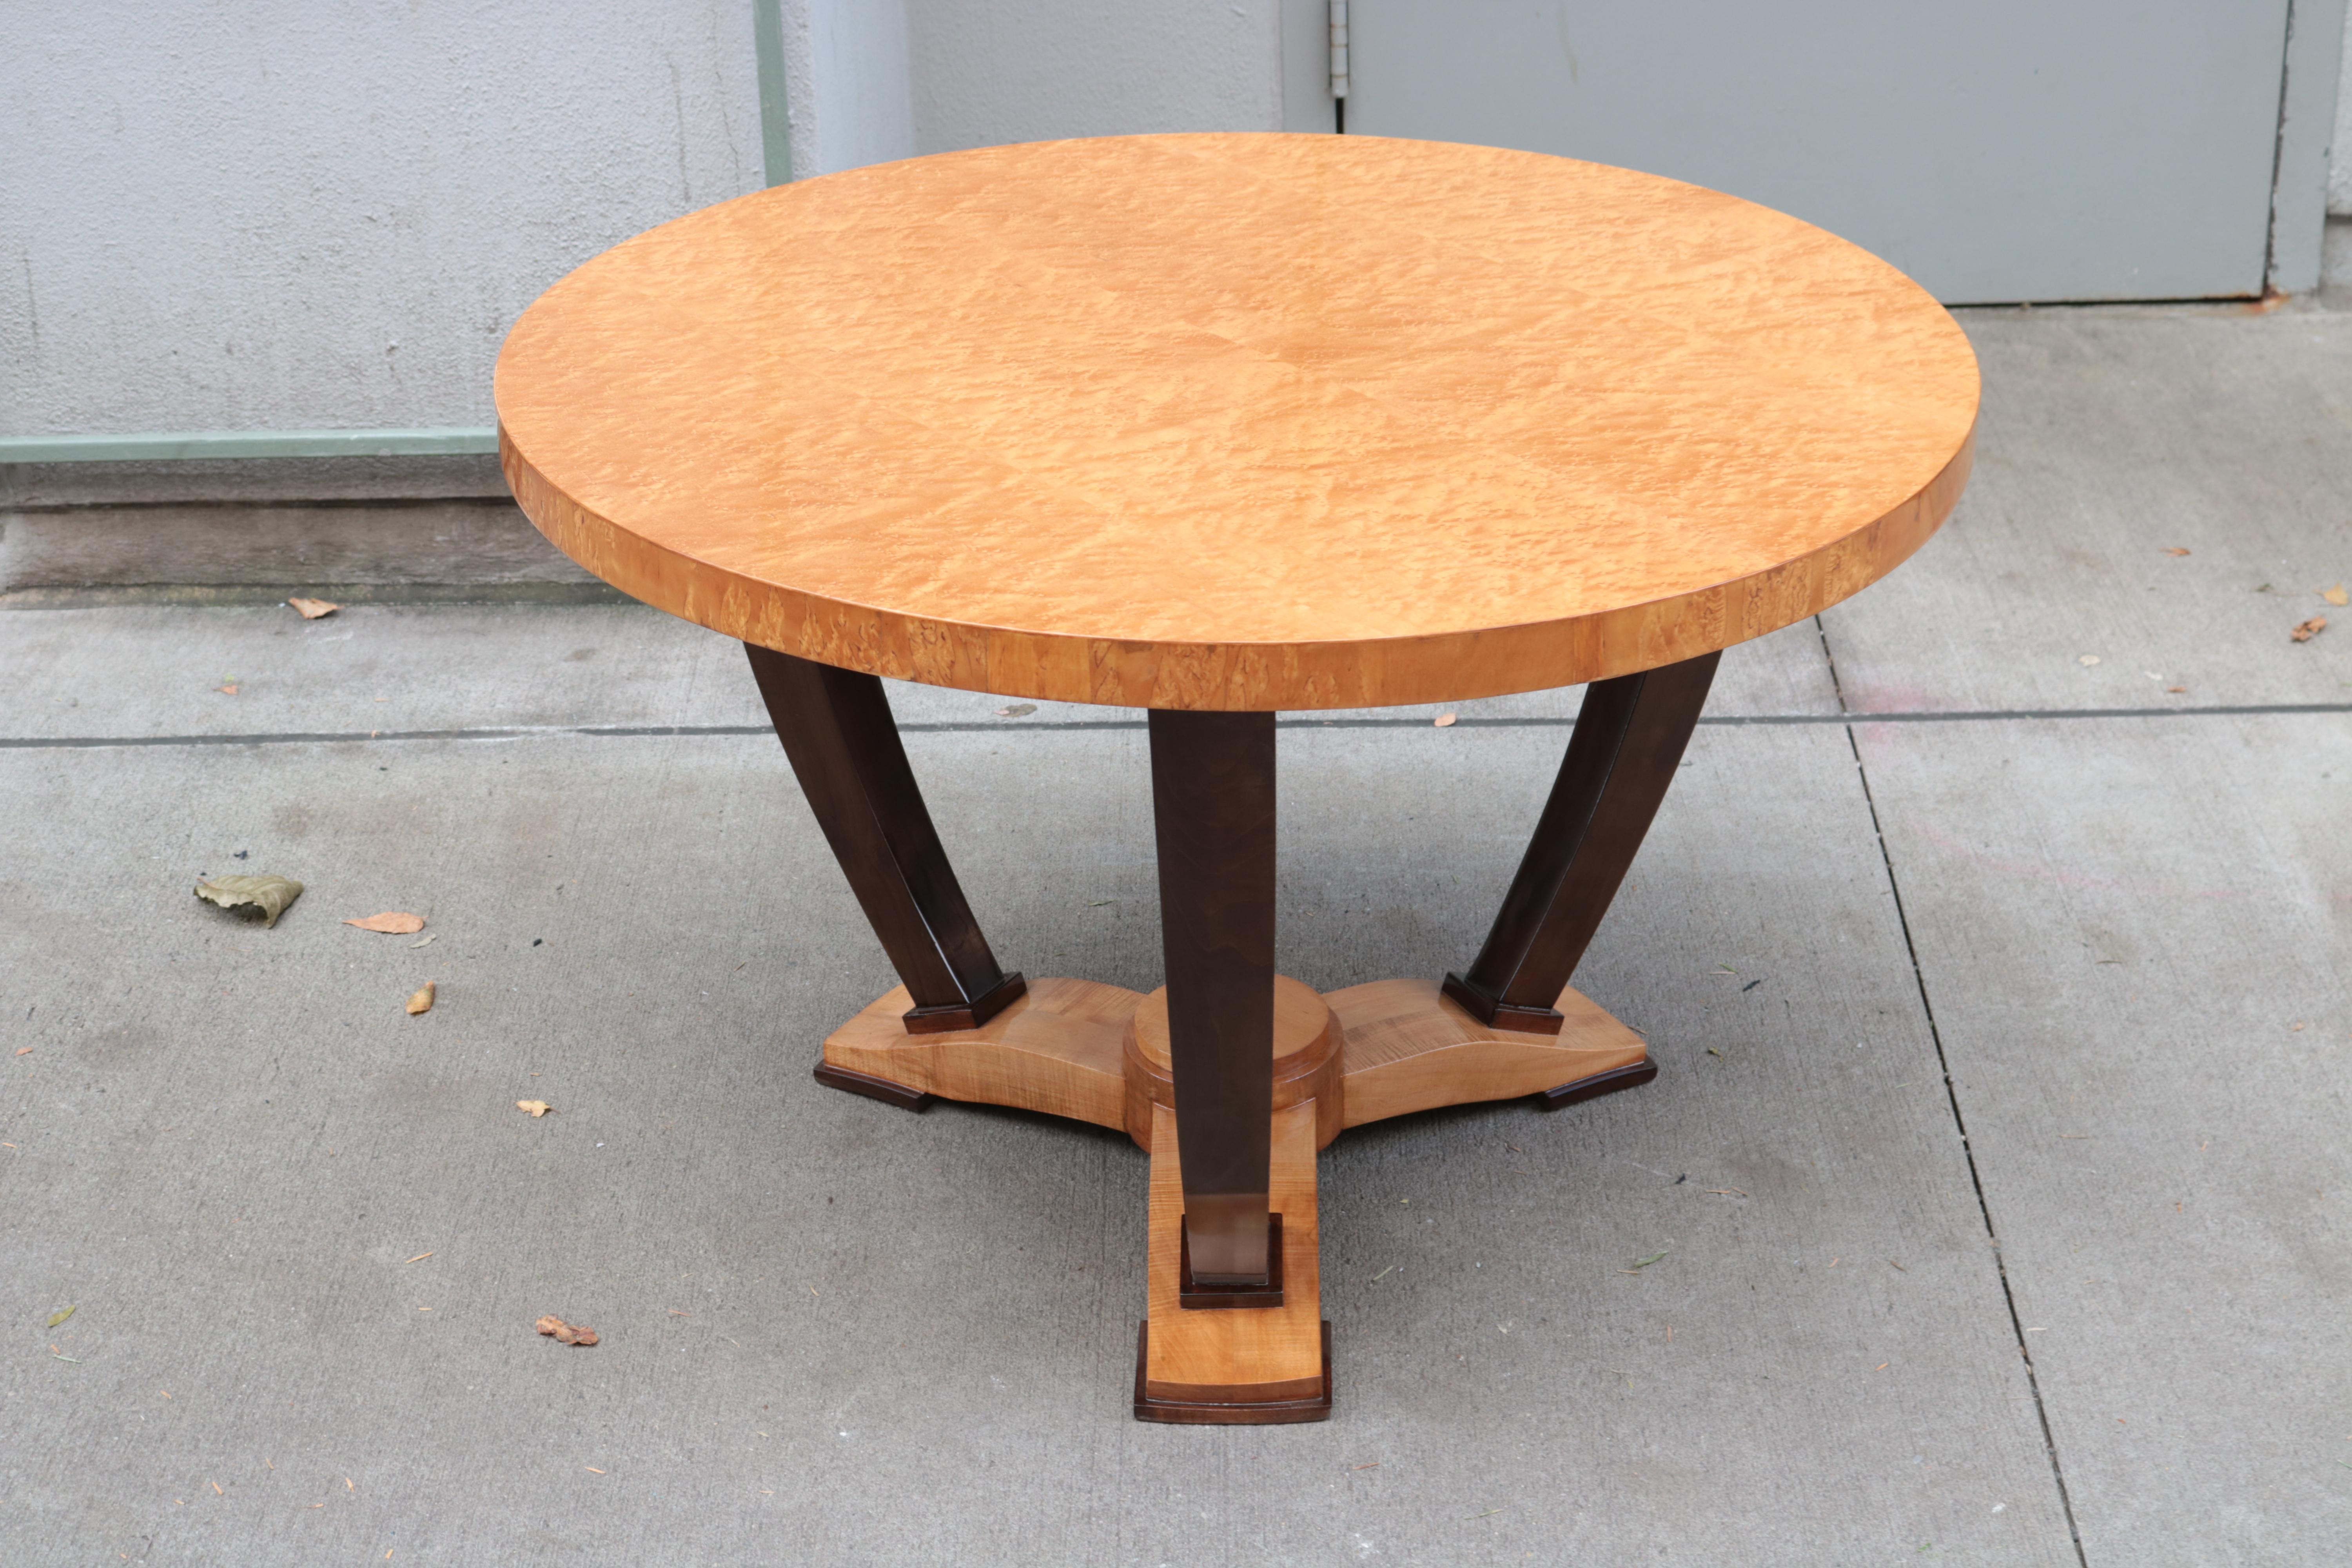 An Art Deco round side table.
Bird's-eye maple with dark stained legs
mounted on a tripod base.
 